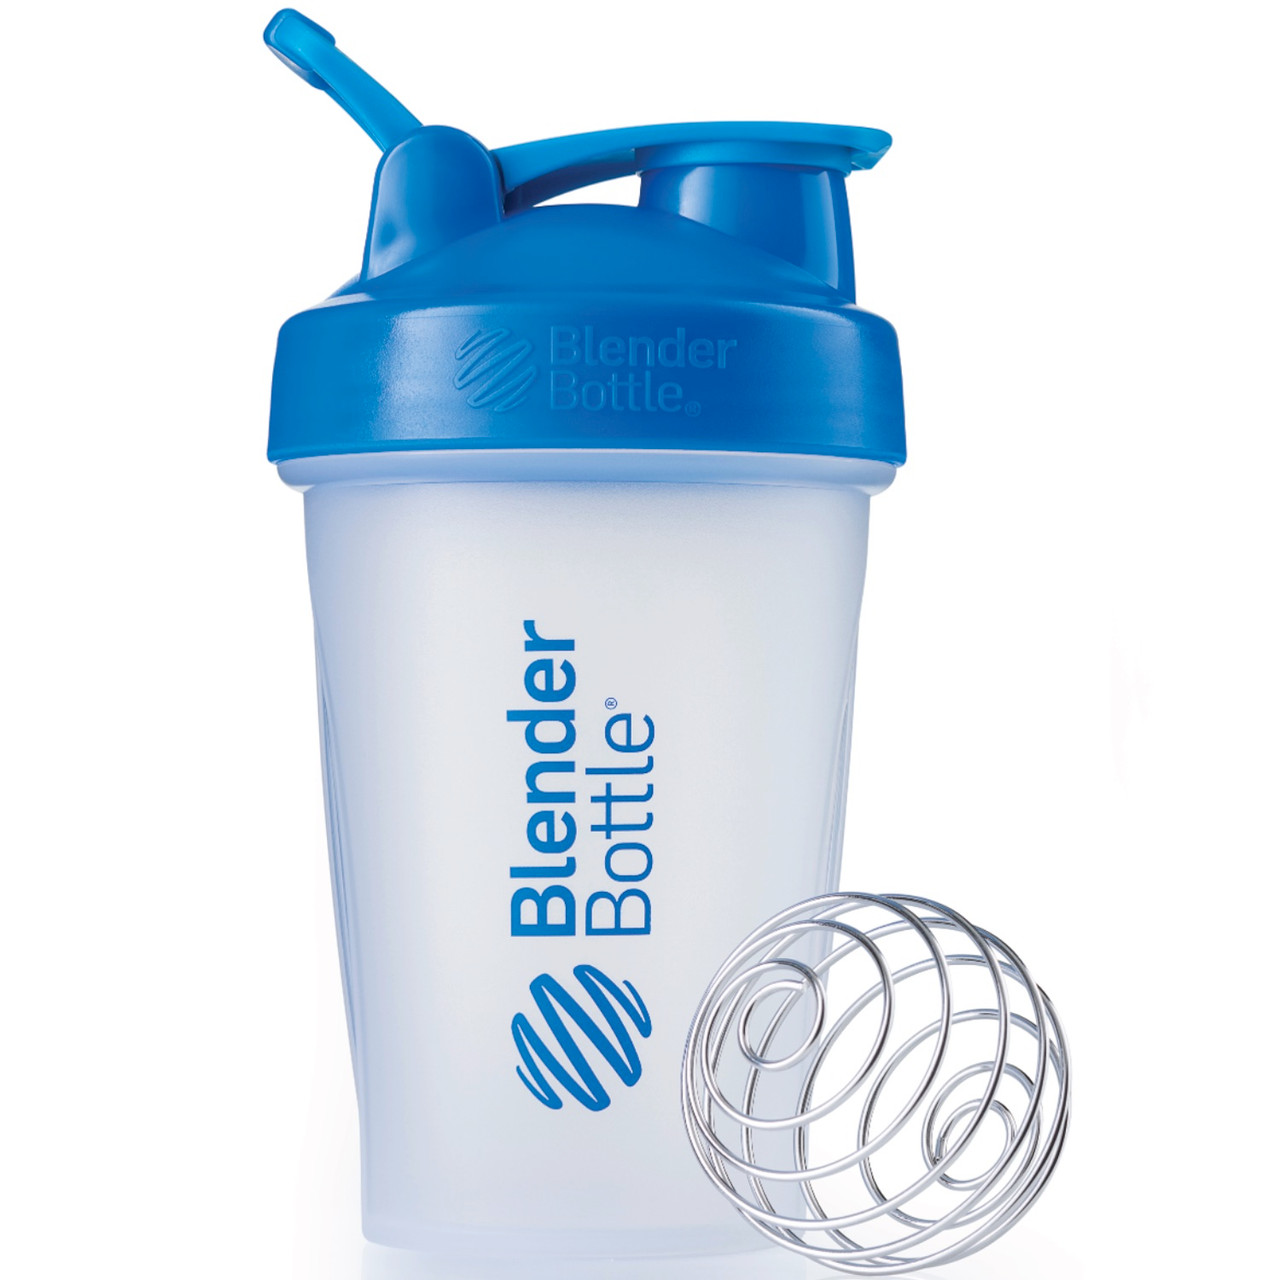 Perfectly Smooth Fiber Mix. Say goodbye to lumpy Fiber mix and protein  shakes. Our powerful mixing system uses the BlenderBall® wire whisk—found  only in BlenderBottle® brand shakers—to deliver smooth Fiber, protein and